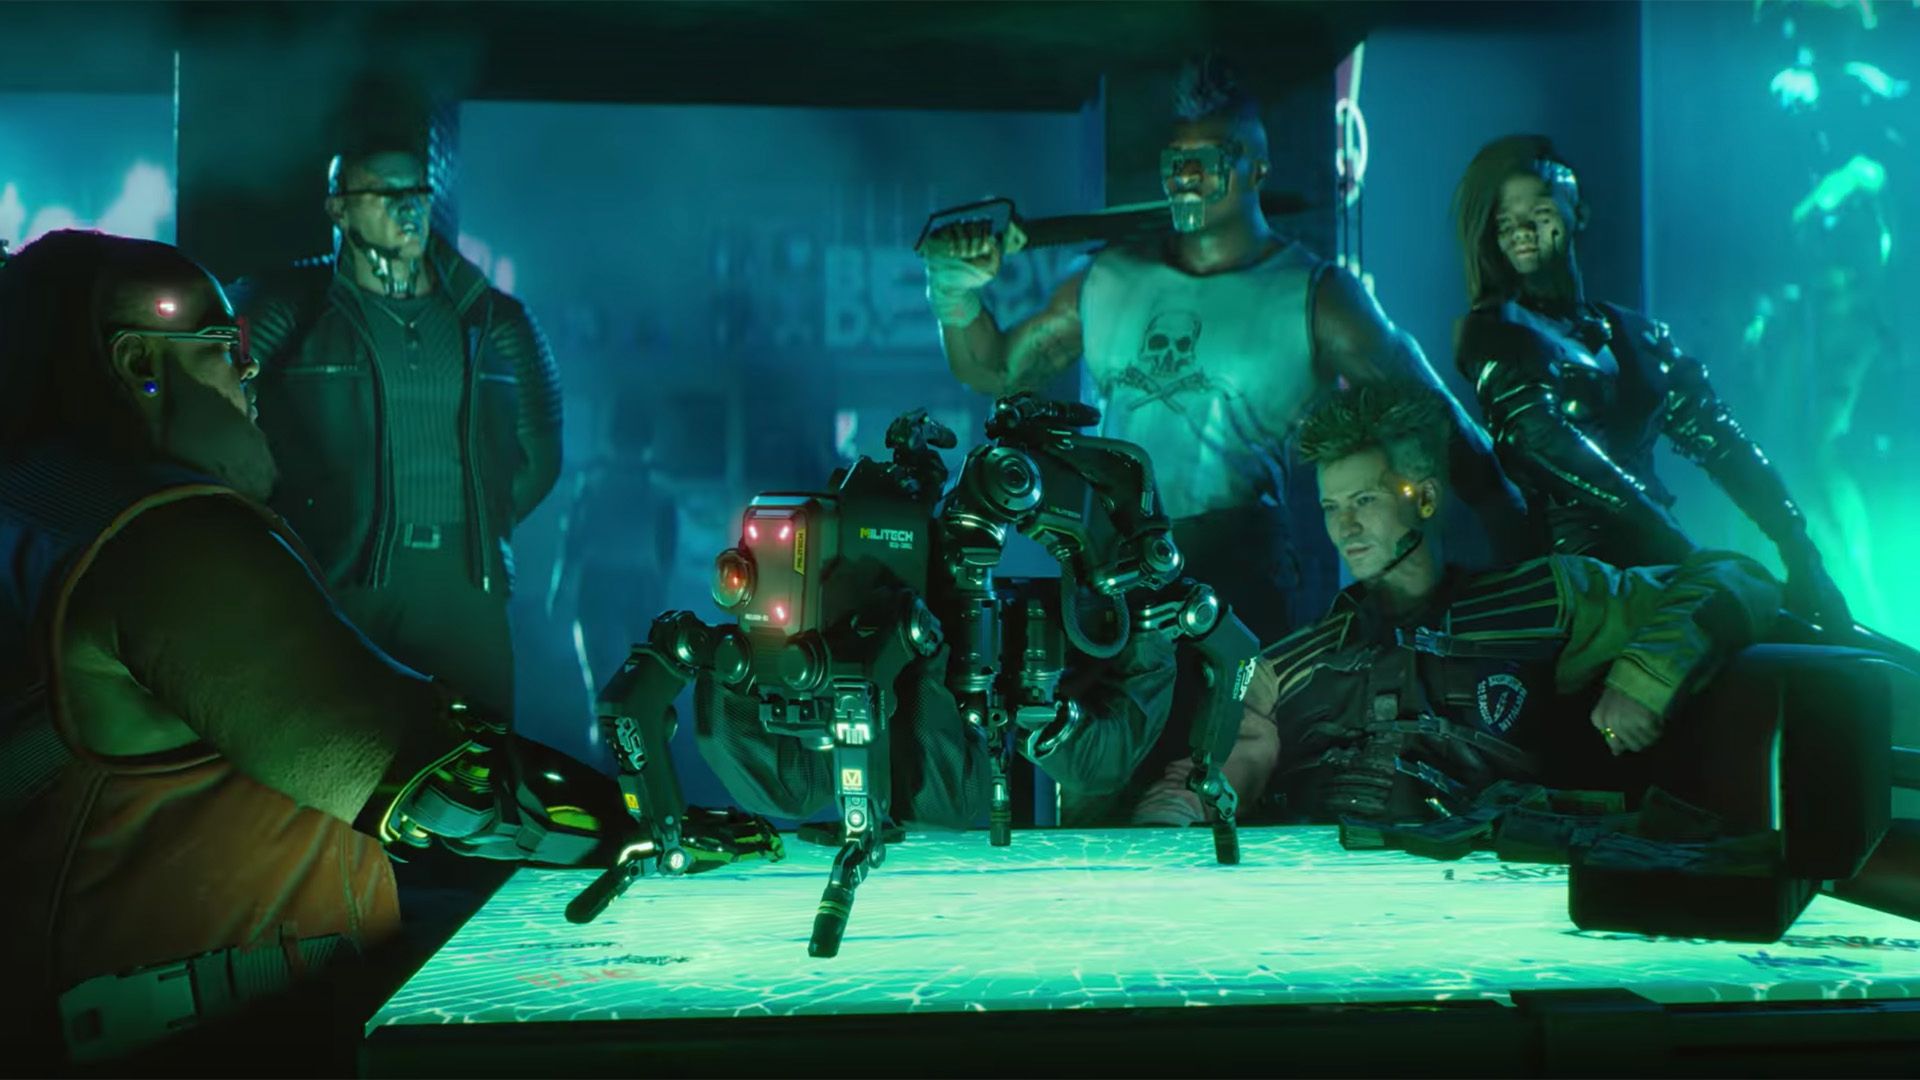 Now you can watch the amazing Cyberpunk 2077 gameplay demo for yourself image 1